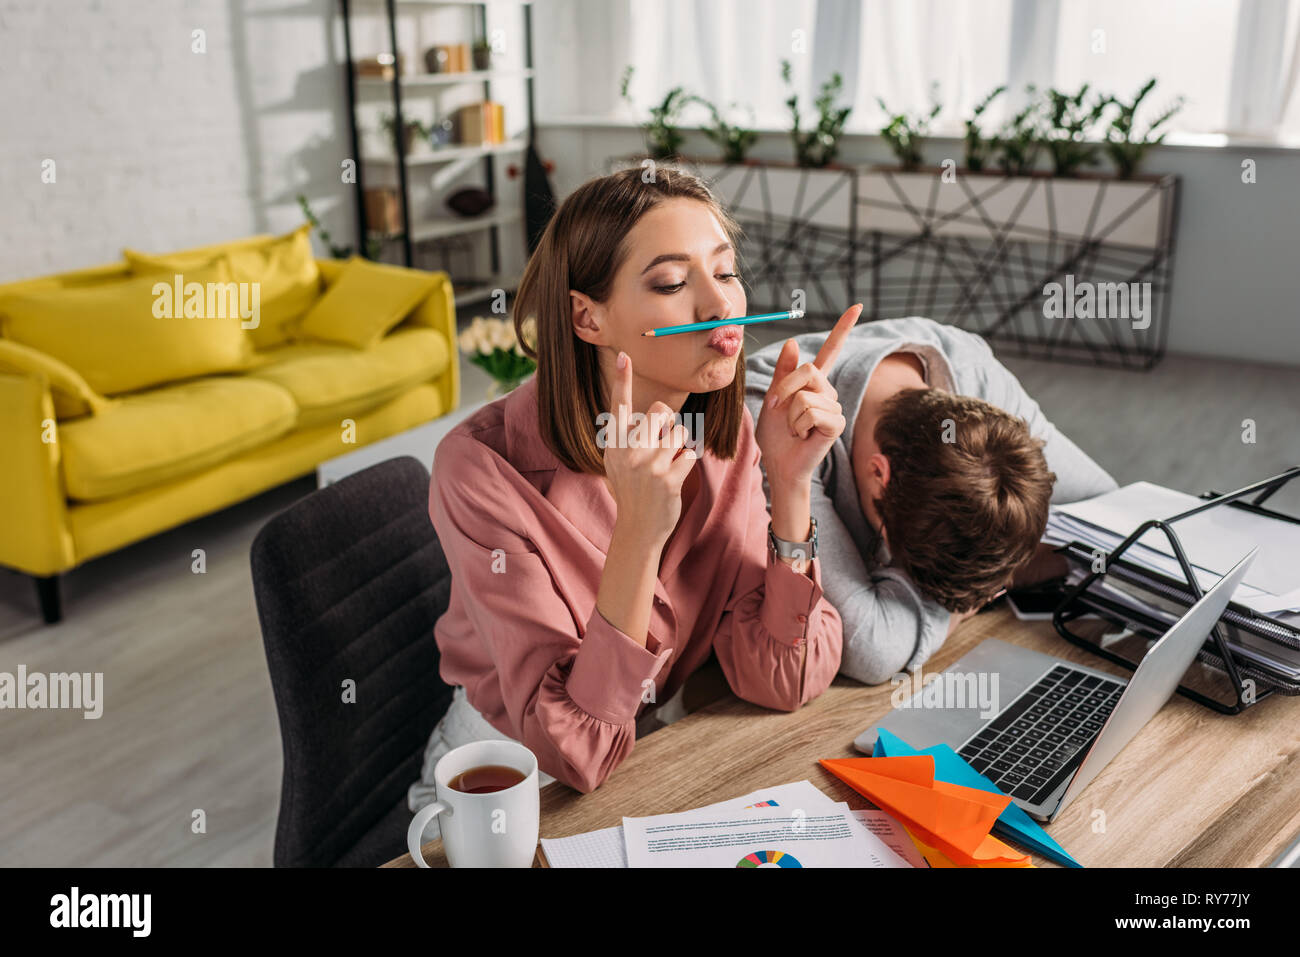 funny girlfriend sitting near boyfriend sleeping at desk near laptop and cup with drink Stock Photo